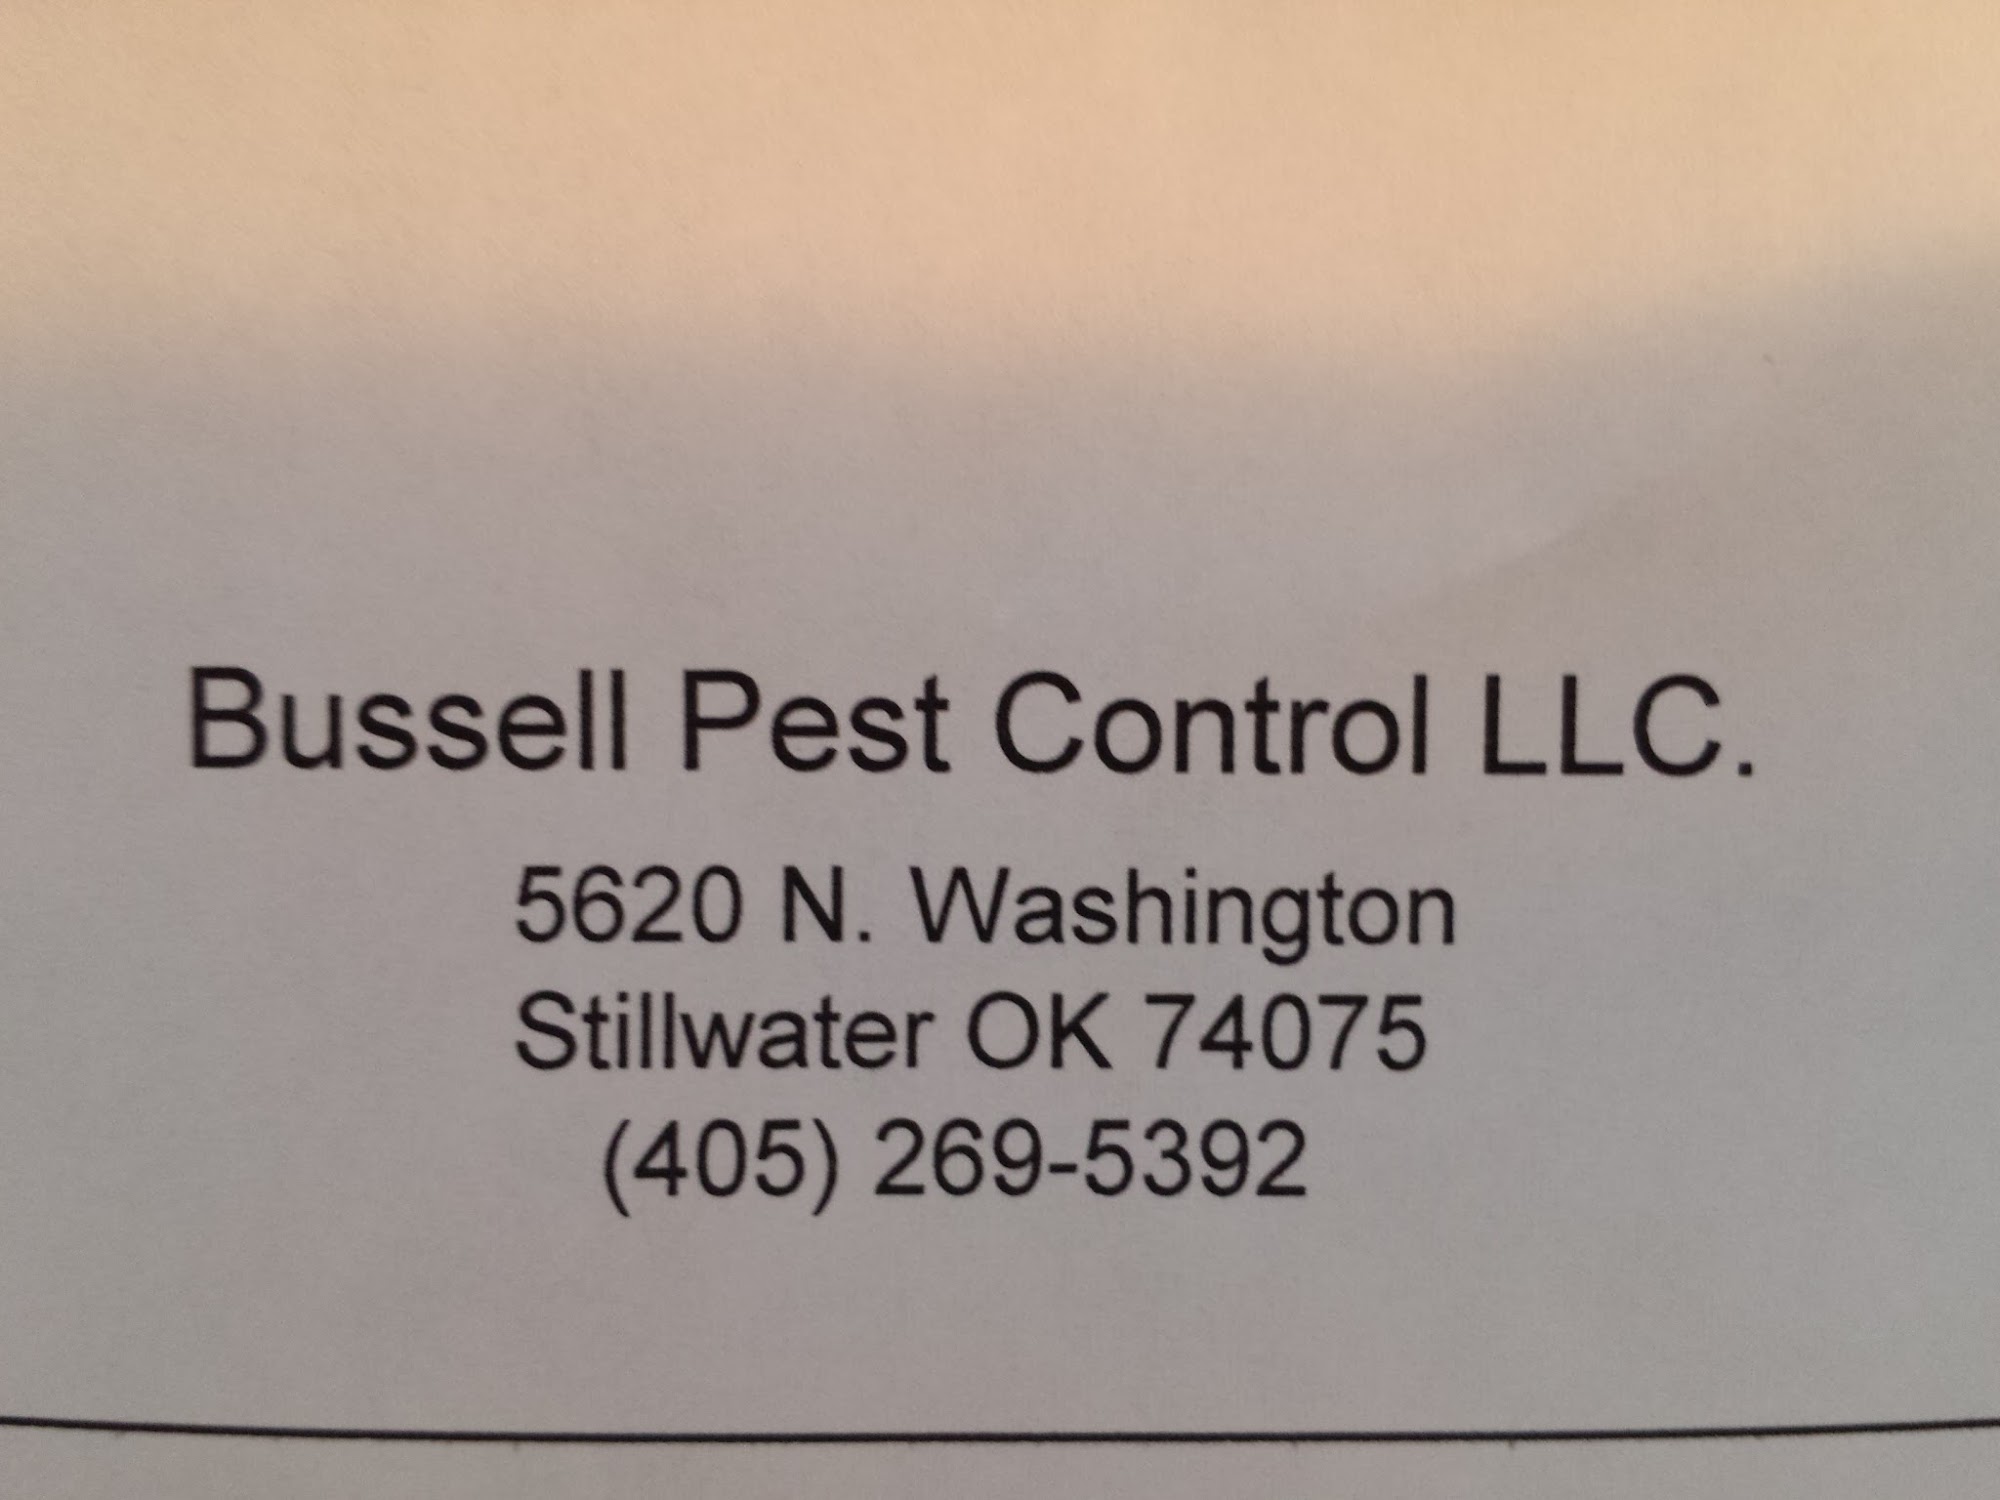 Bussell Pest Control